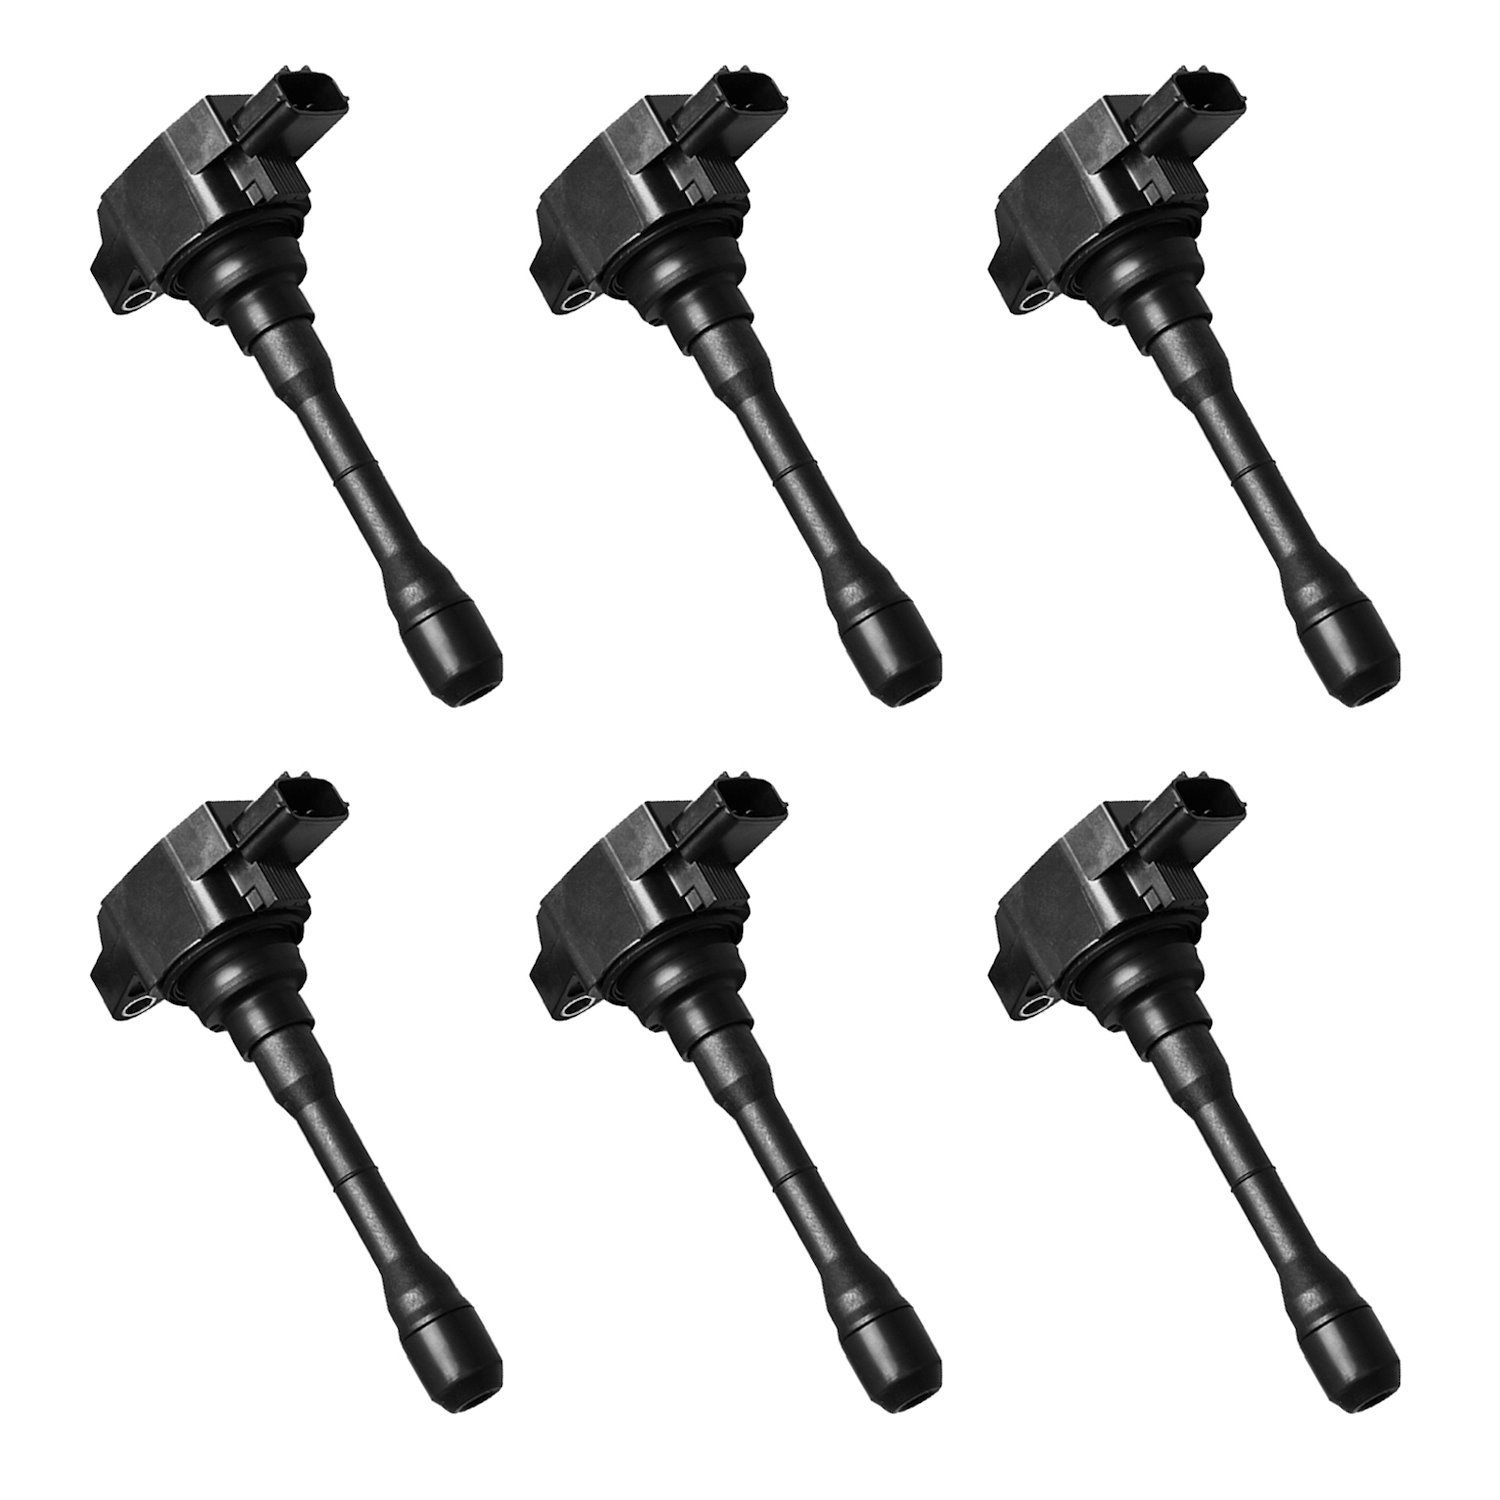 OE Replacement Ignition Coils for 3.0L V6 Infinity